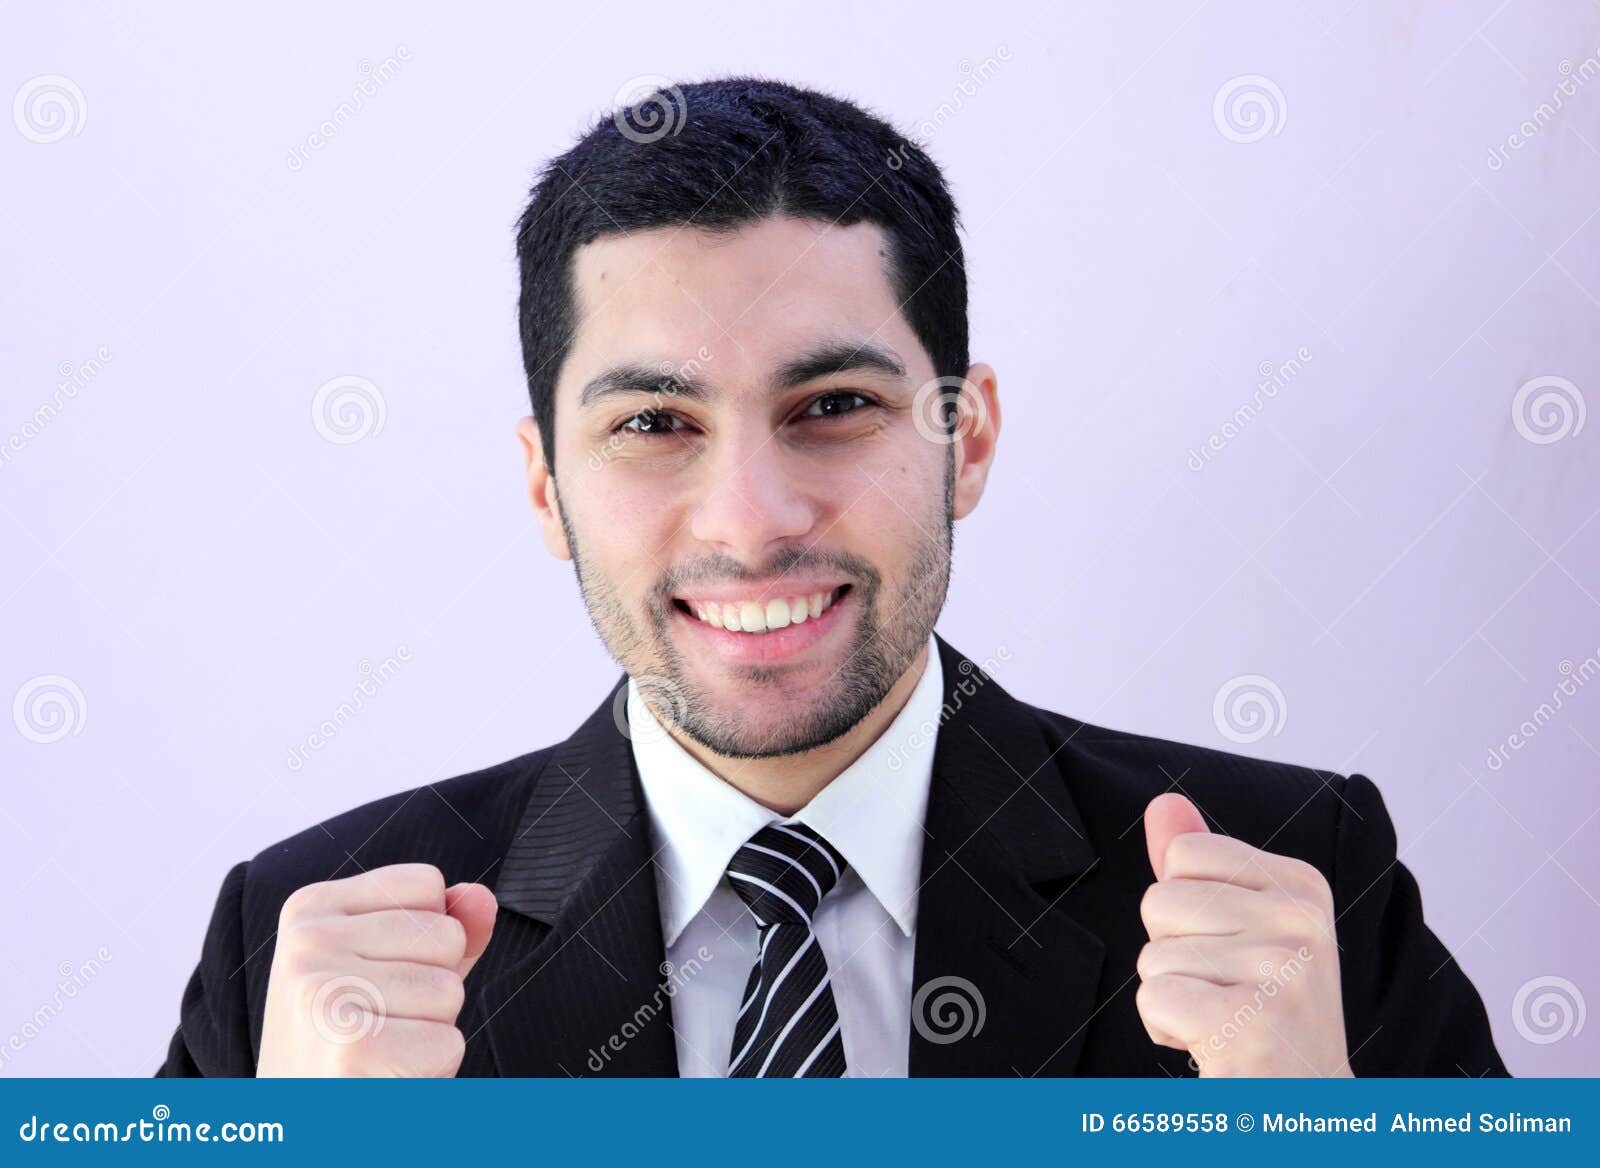 Happy business man stock photo. Image of east, black - 66589558